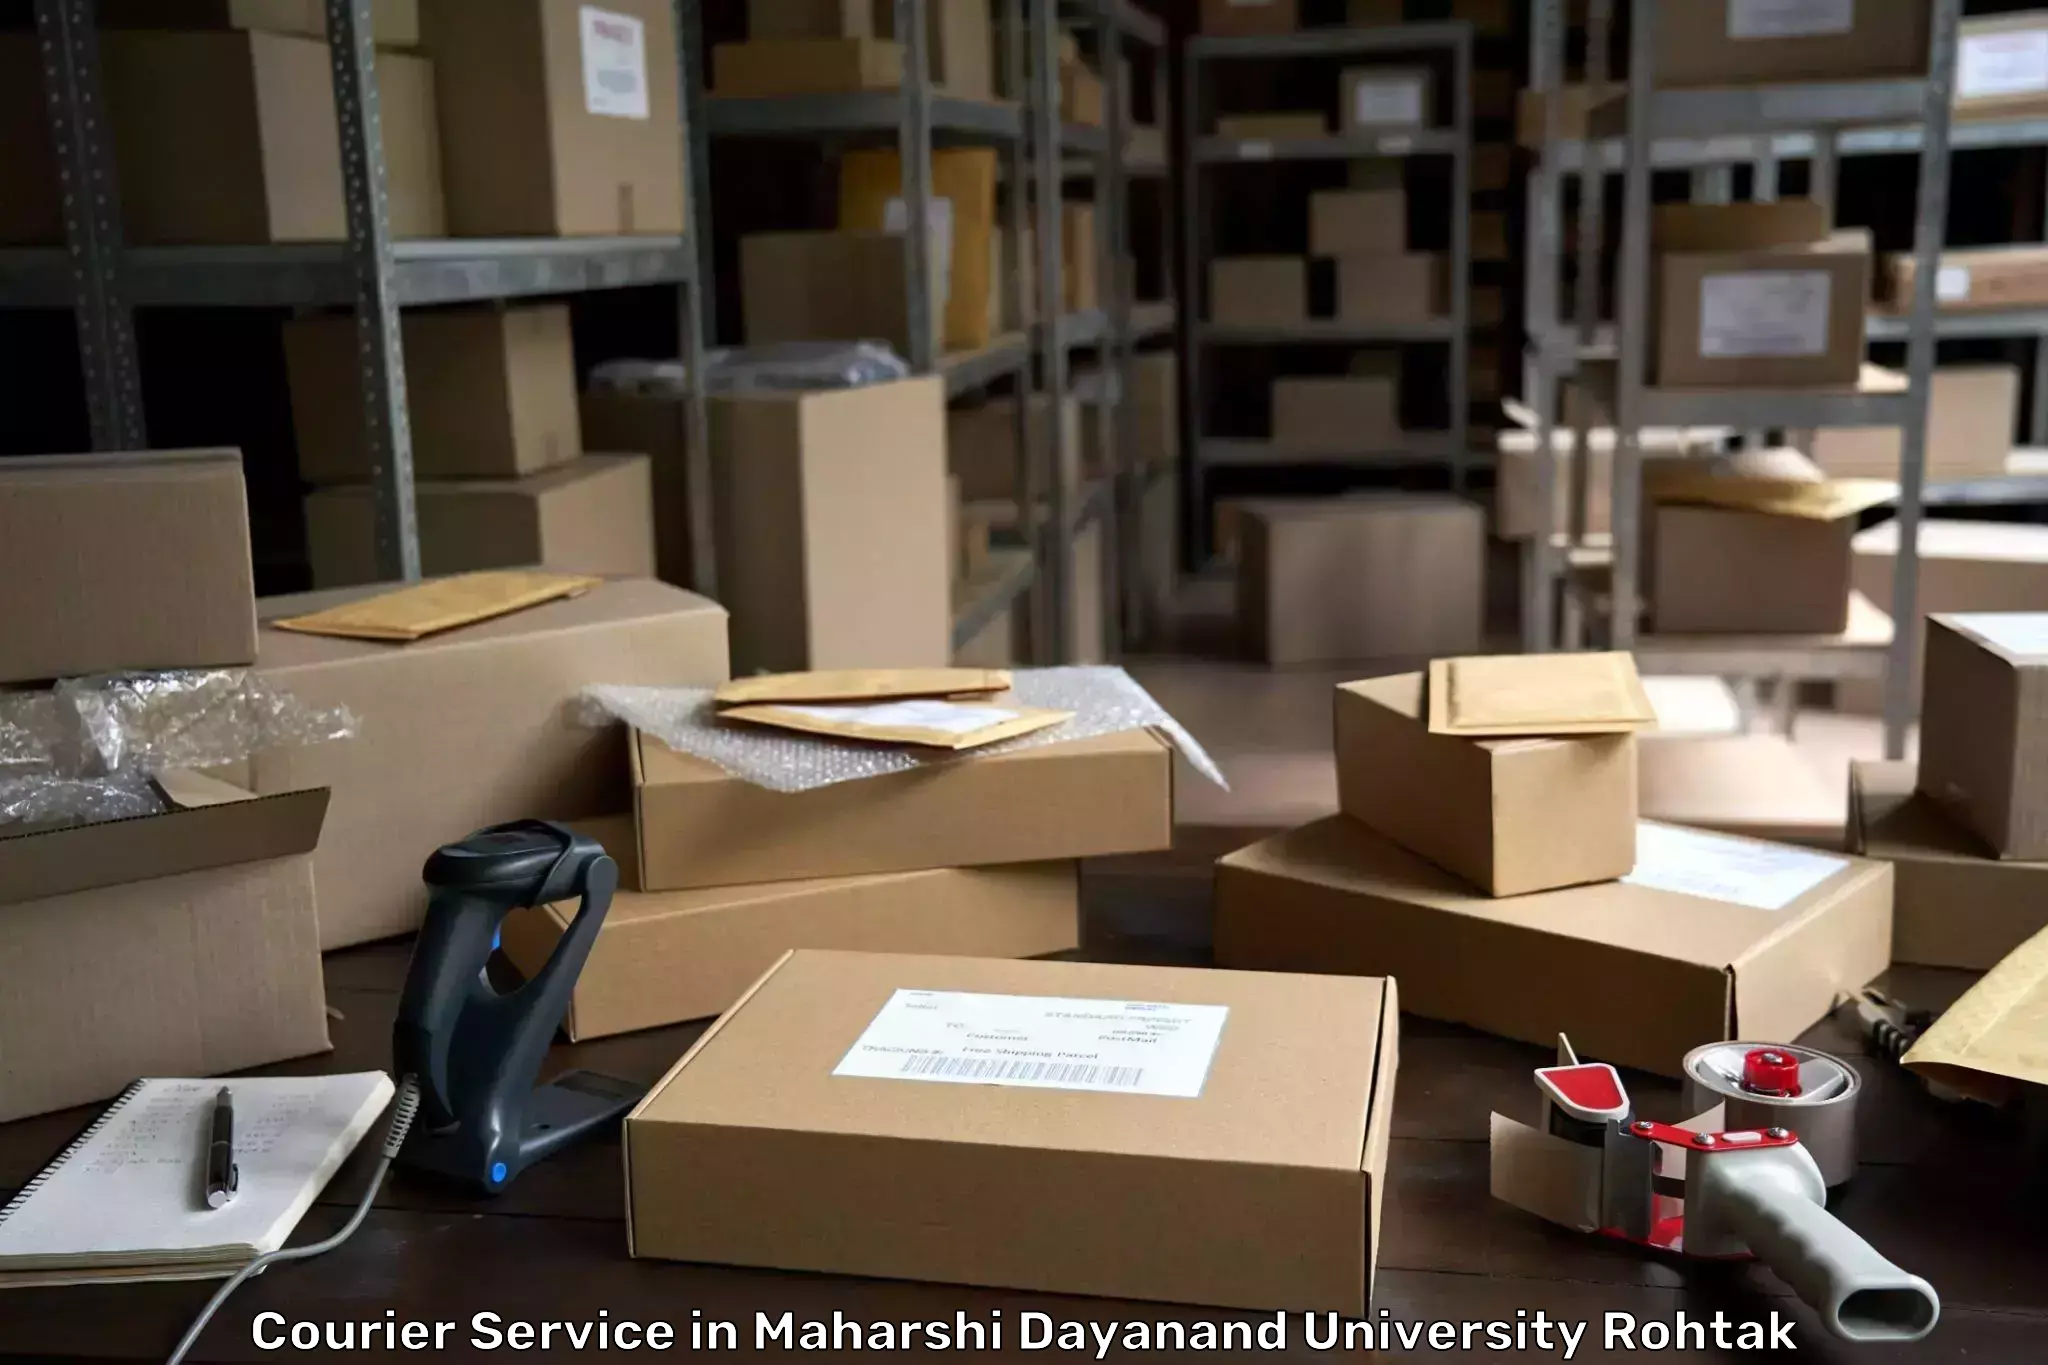 Reliable package handling in Maharshi Dayanand University Rohtak